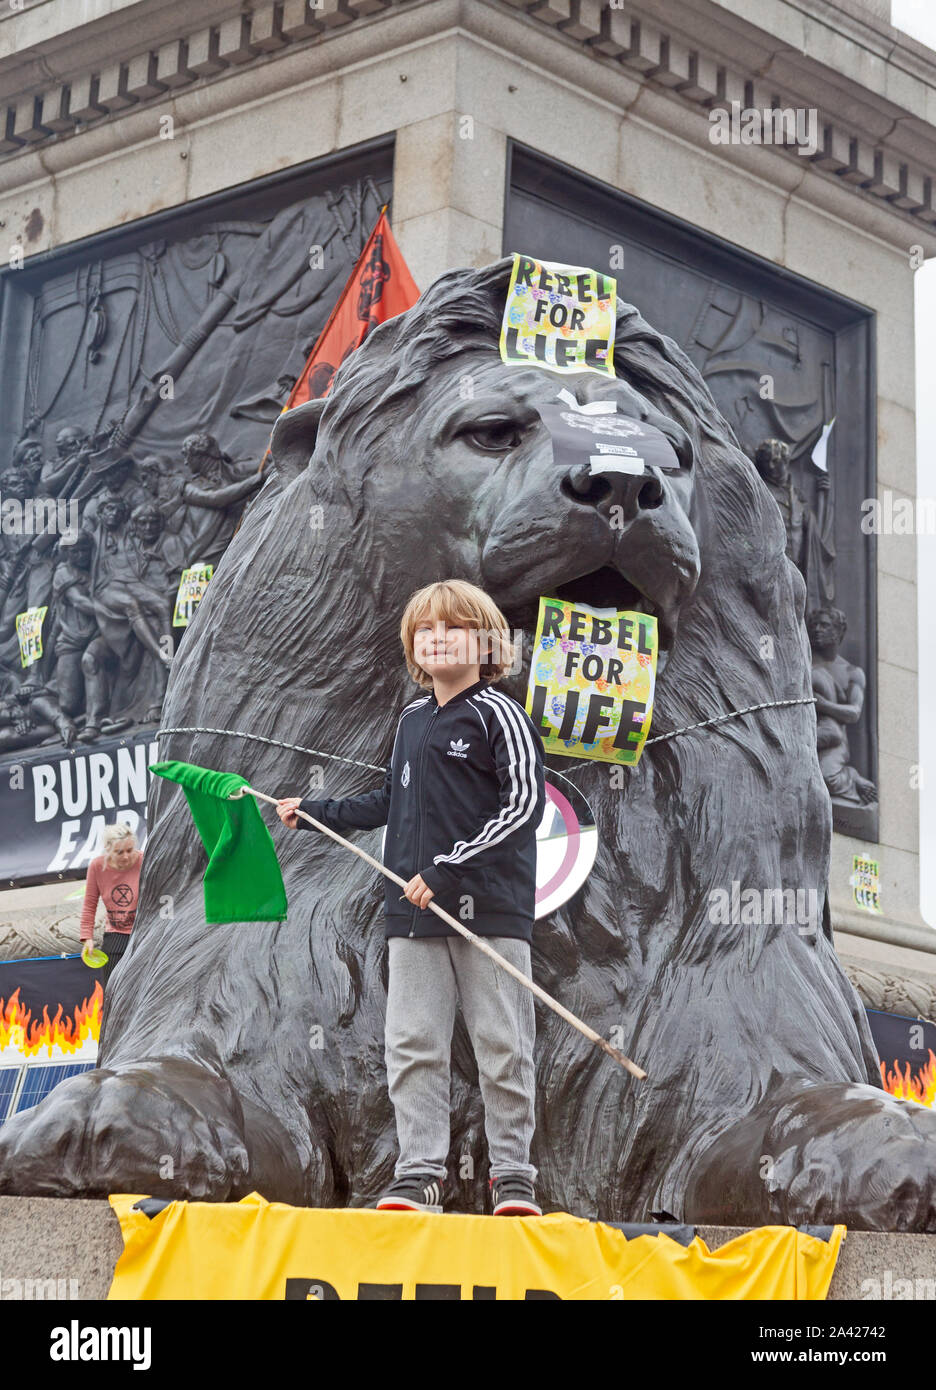 October 8th, 2019. The first day of Extinction Rebellion's occupation of Trafalgar Square.  A young demonstrator on one of the lion plinths. Stock Photo